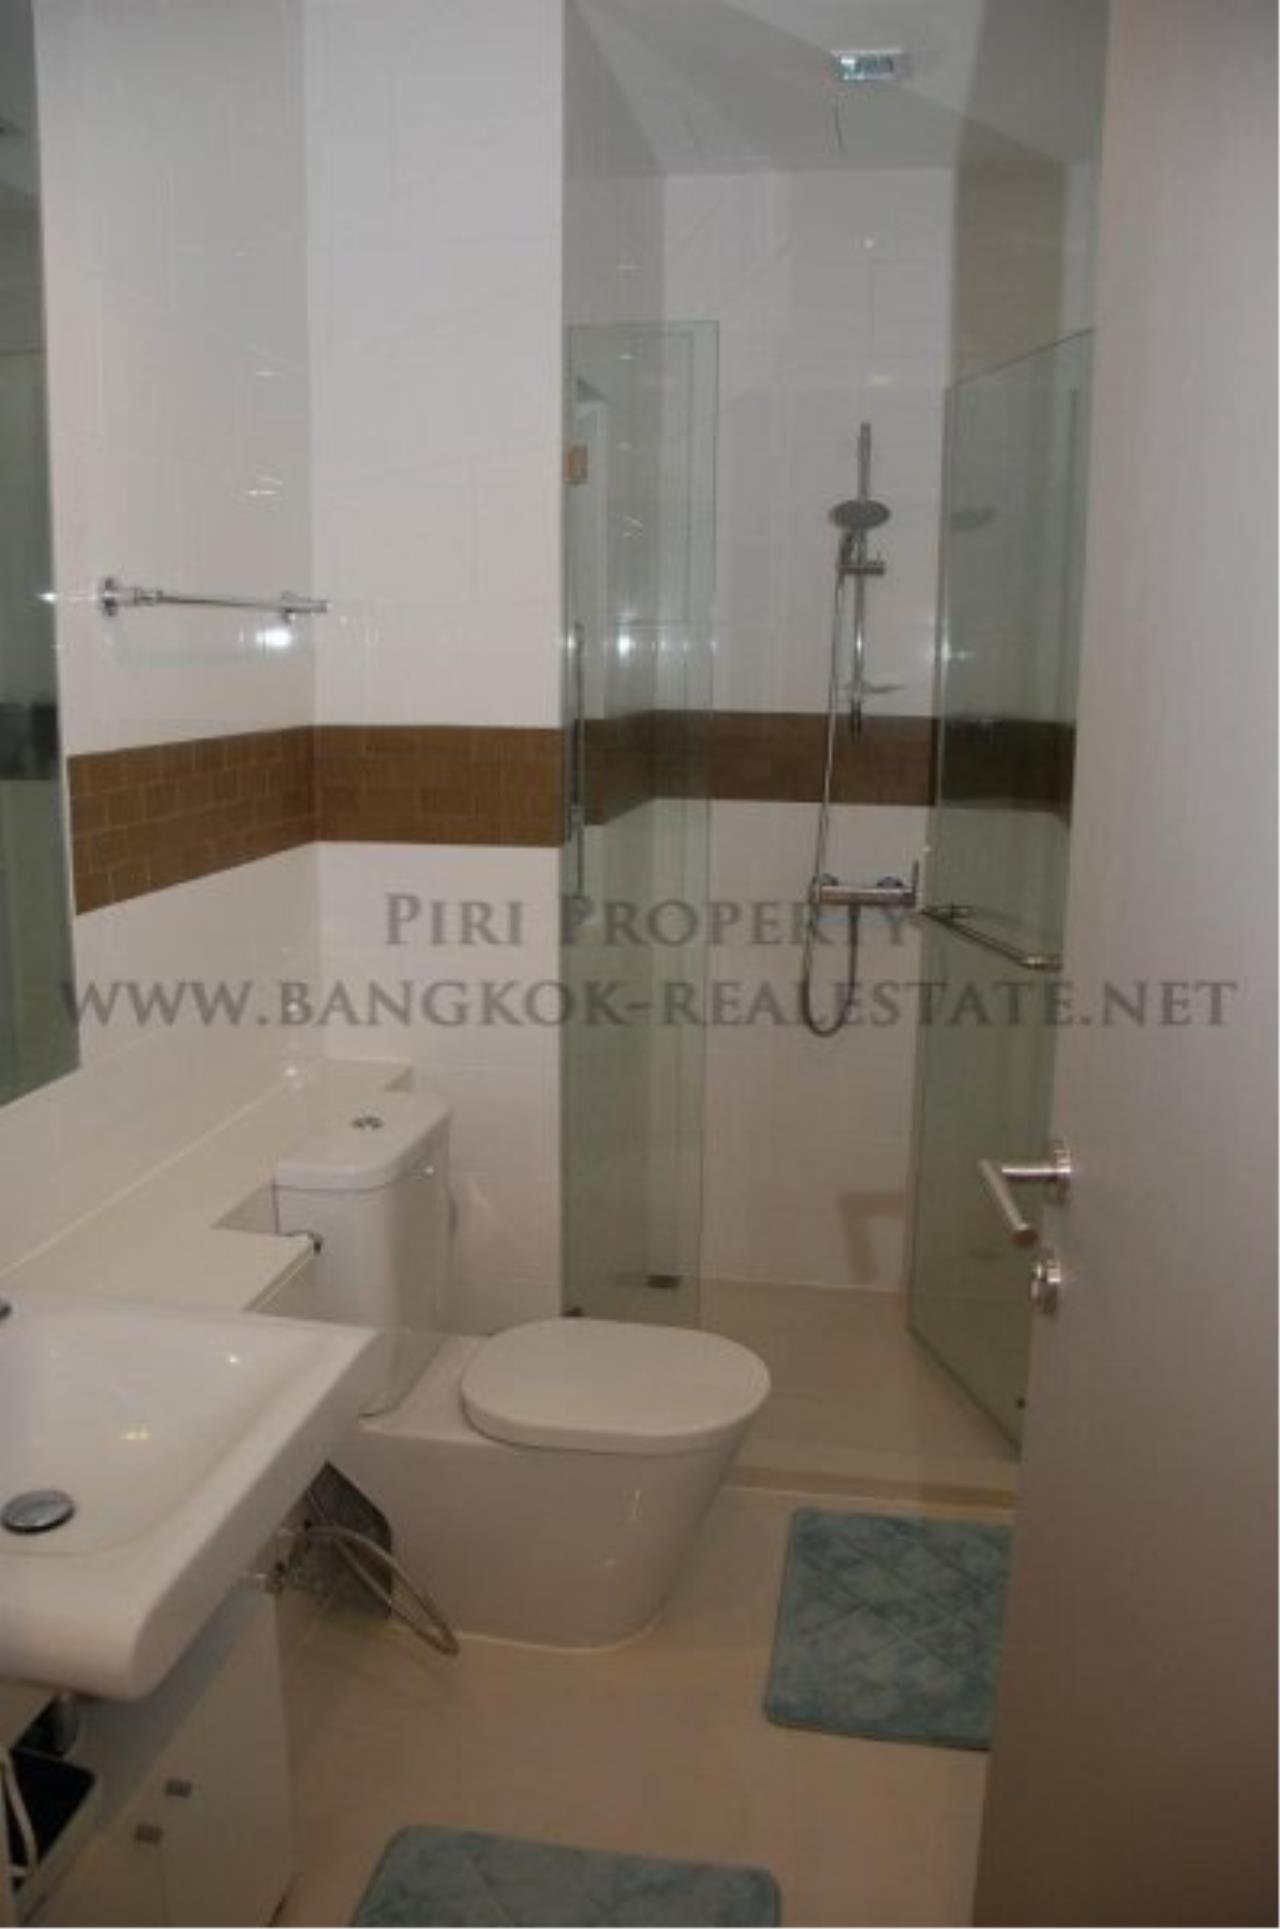 Piri Property Agency's BTS Onnut at your doorstep - IDEO Verve 1+1 BR Condo for rent 6